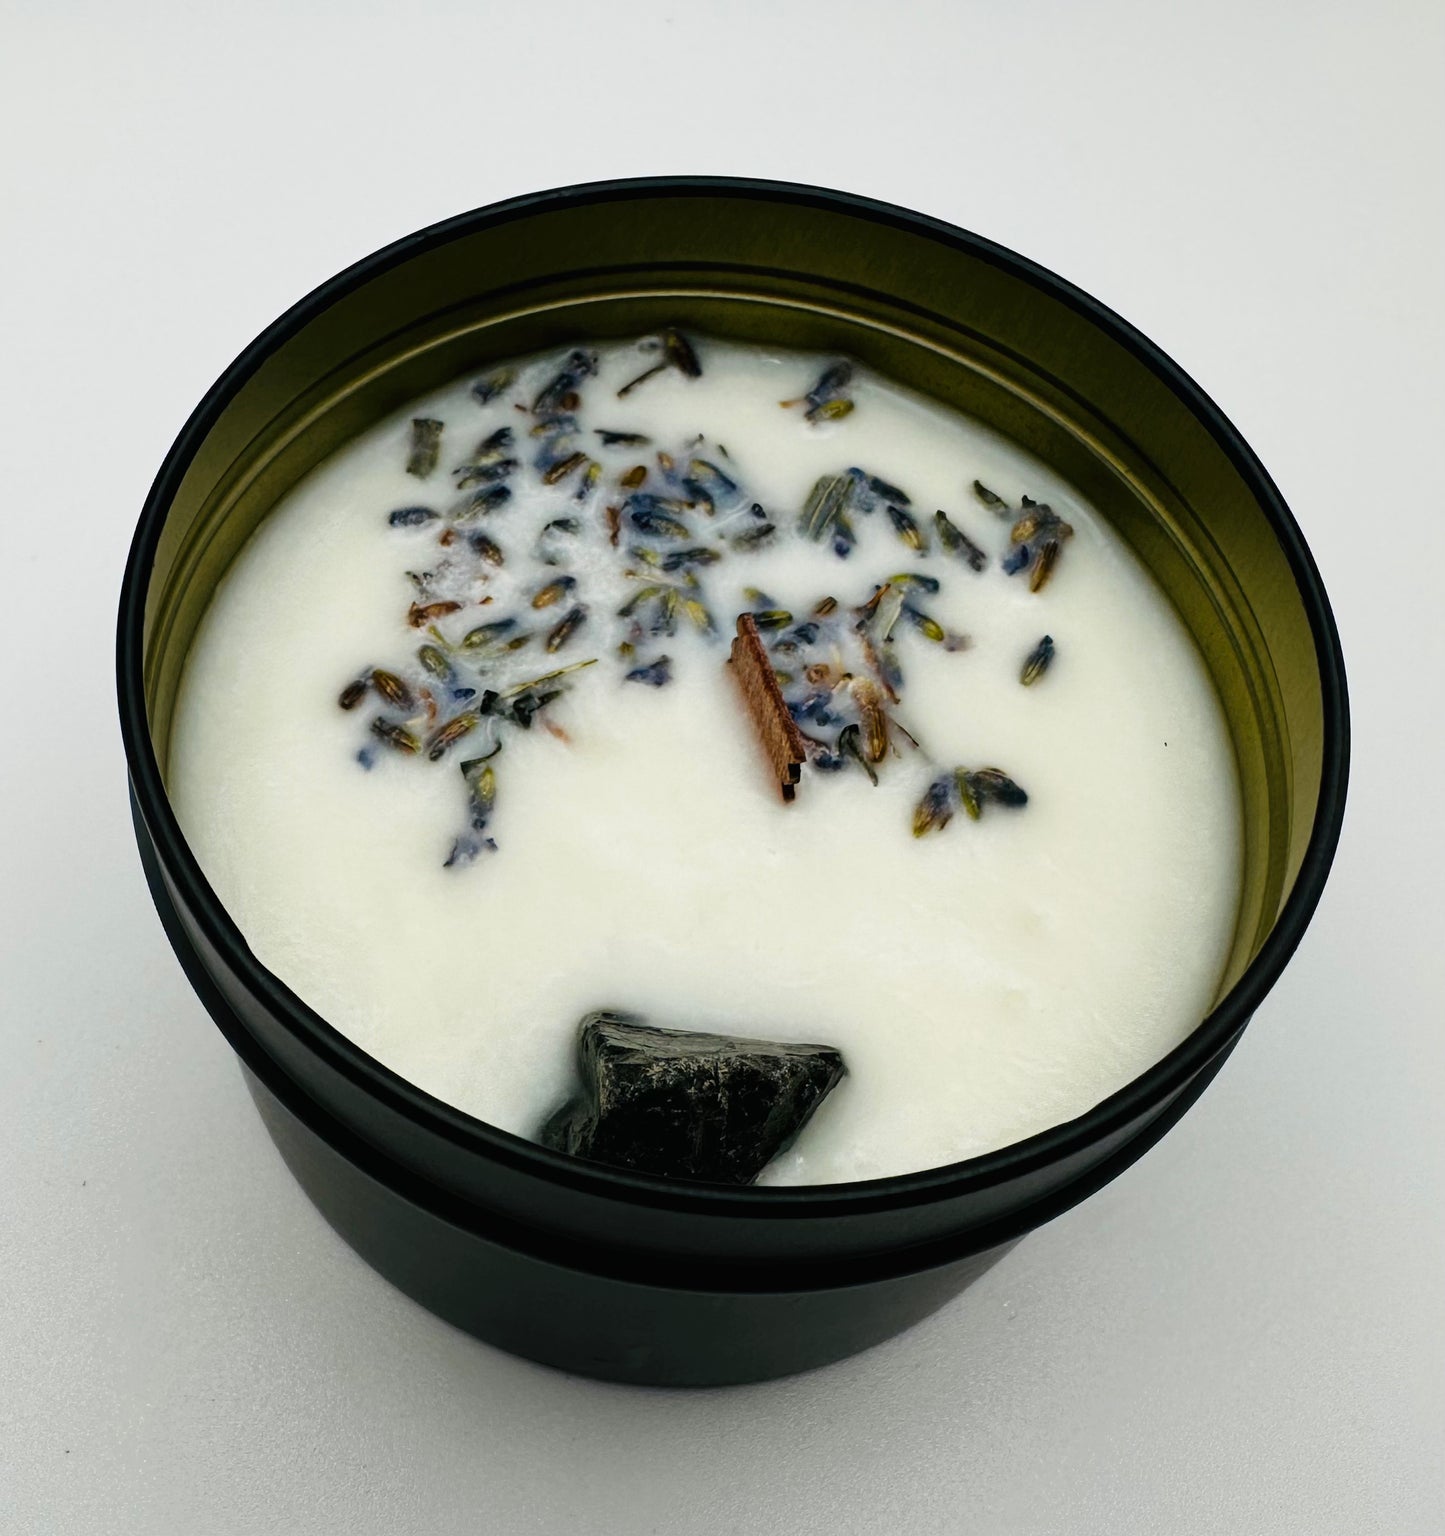 Jasmine Candle with Lavender Buds